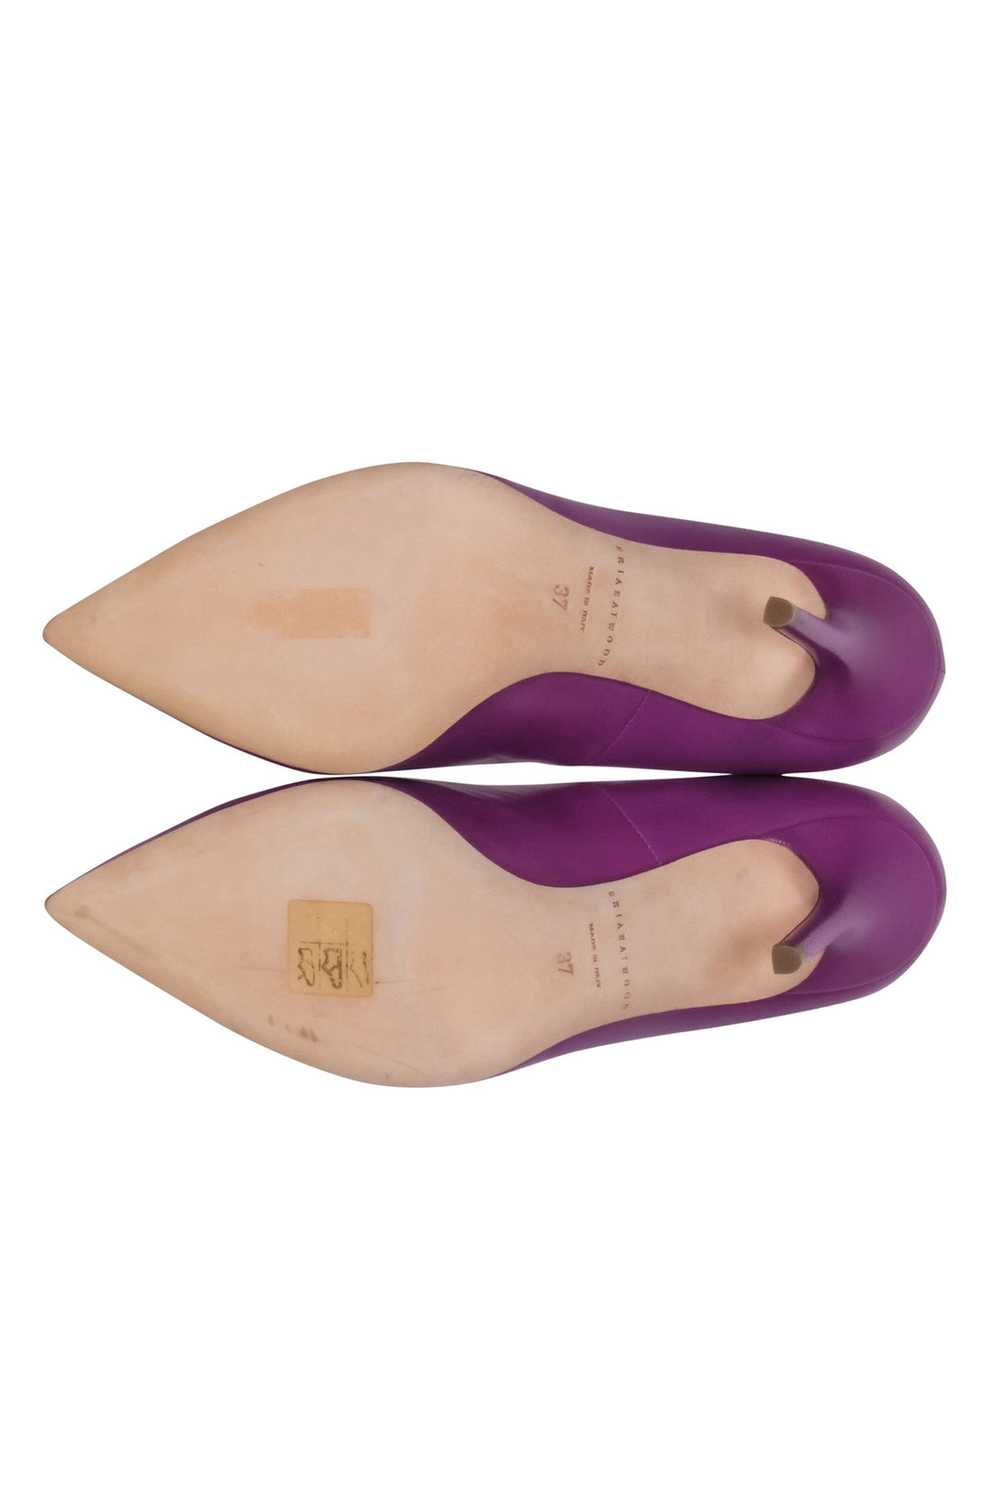 Brian Atwood - Purple Leather Pointed Toe Pumps S… - image 5